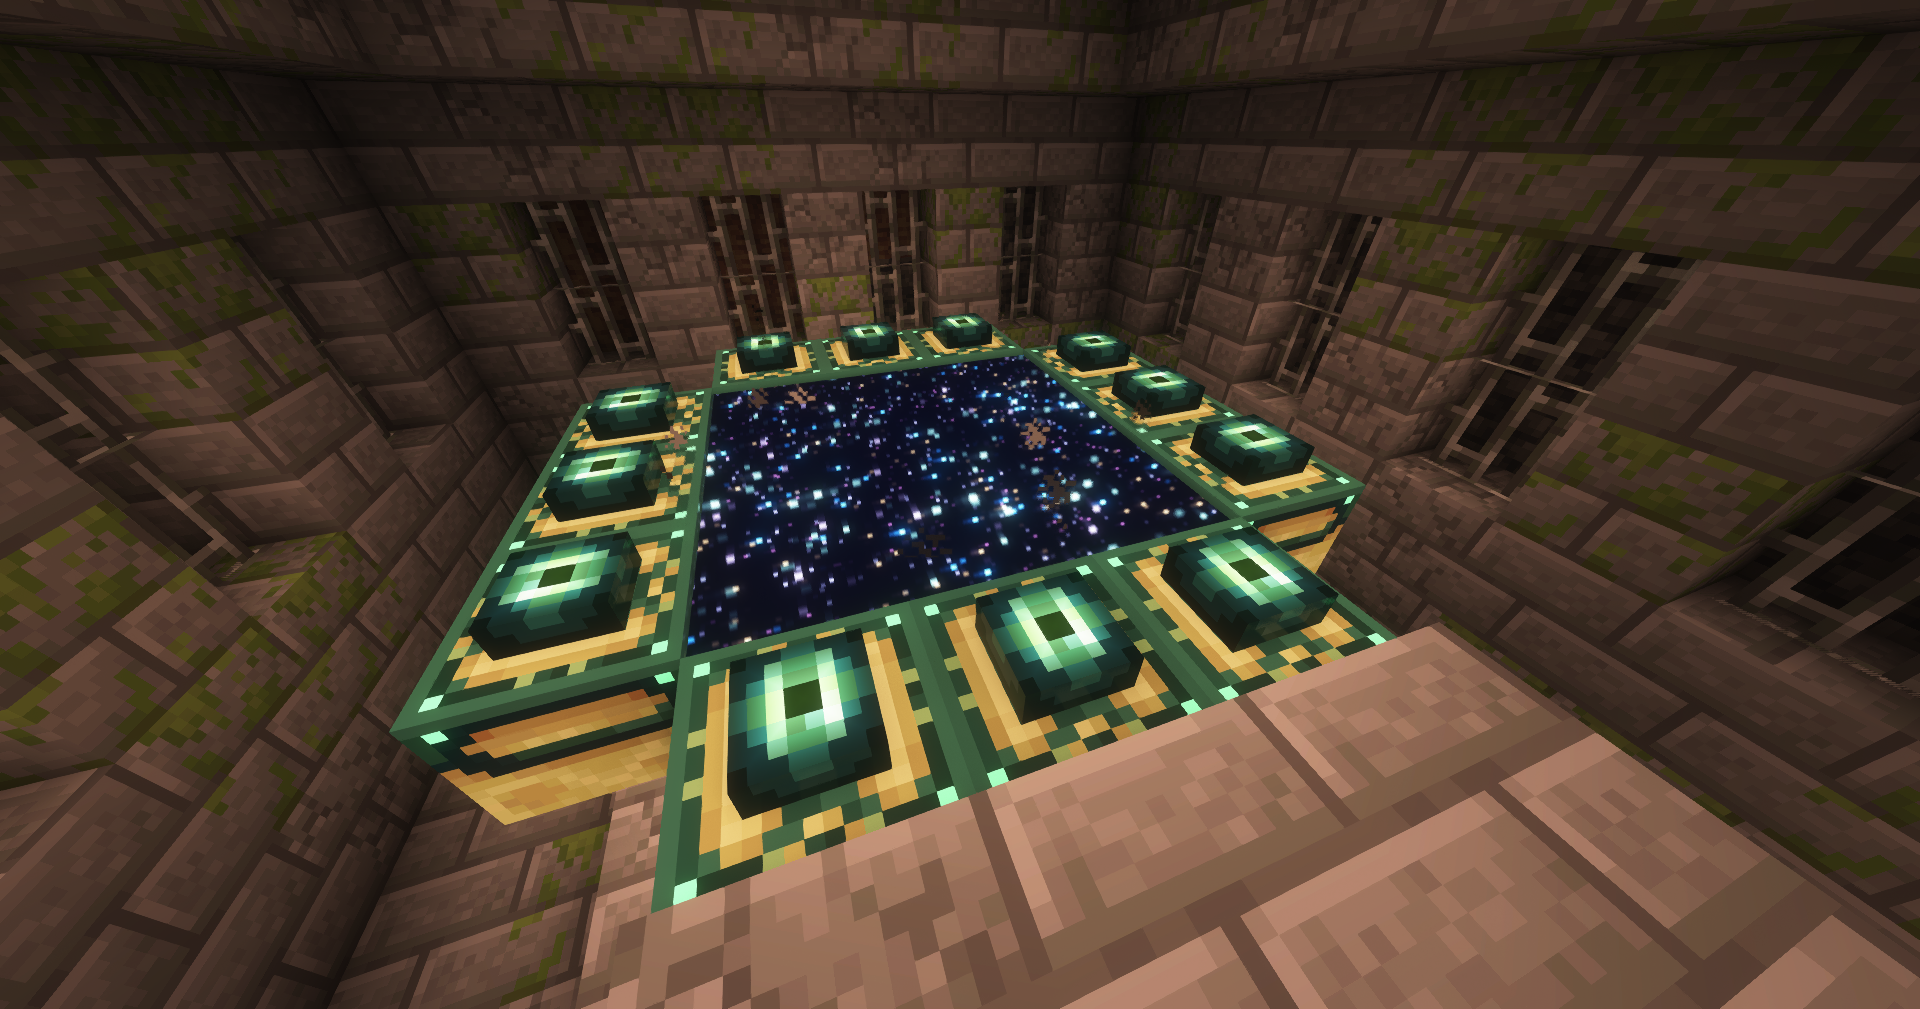 Portal picture for backdrop image. (This plugin does block teleports to the end though! -- If configured to.)